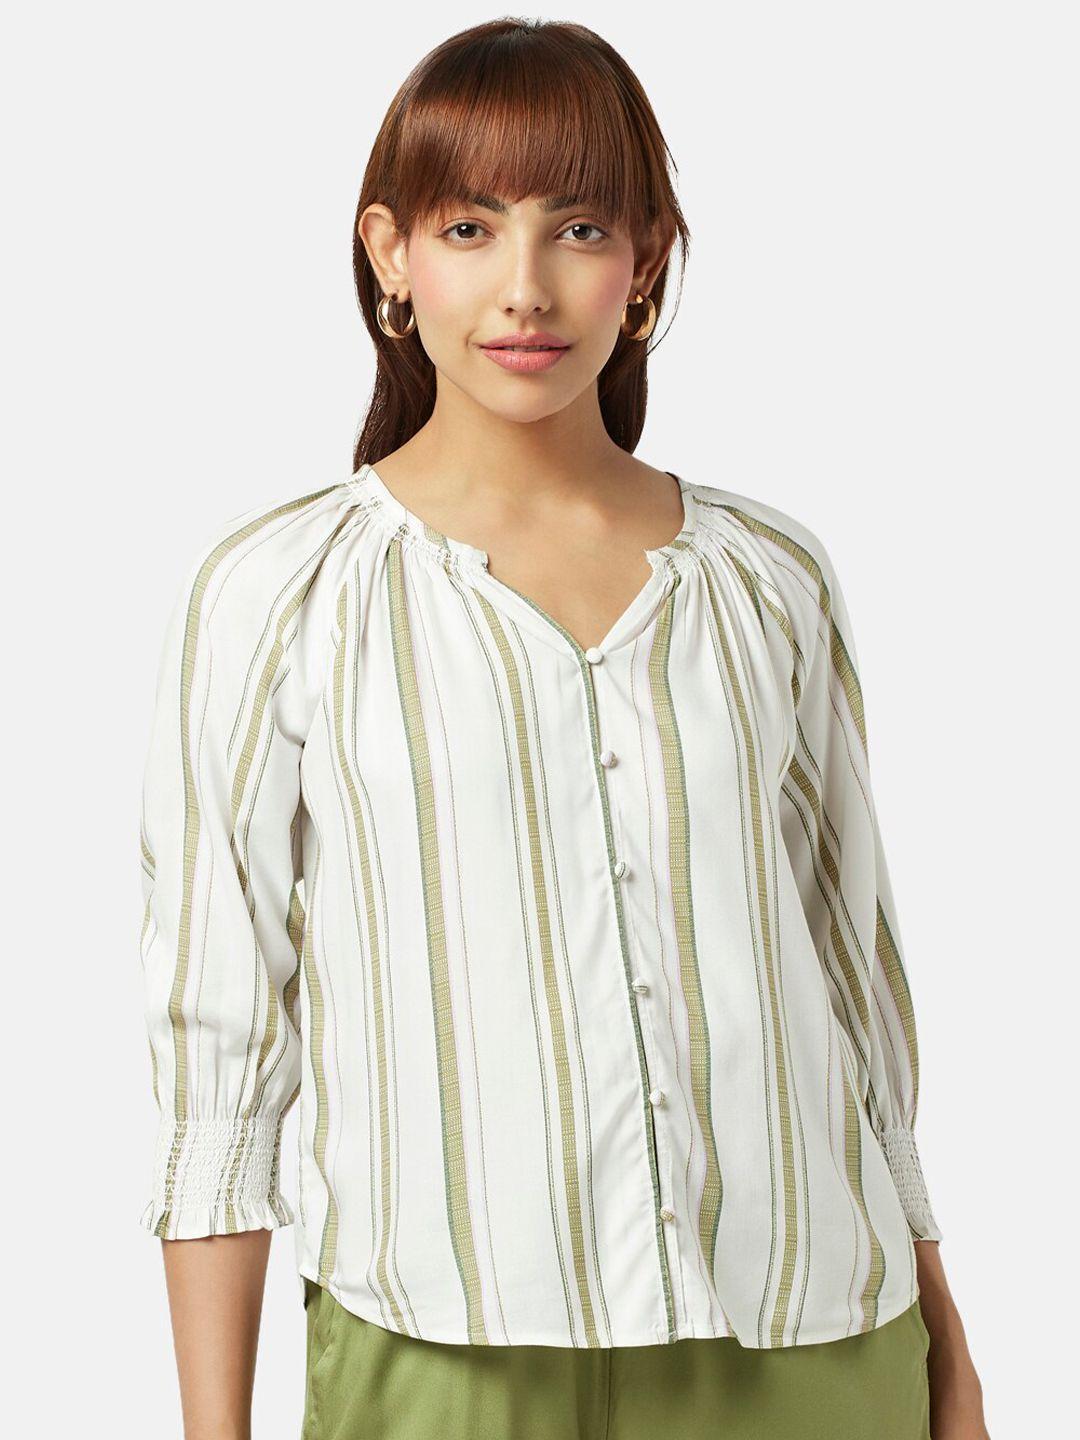 honey by pantaloons striped halter neck shirt style top